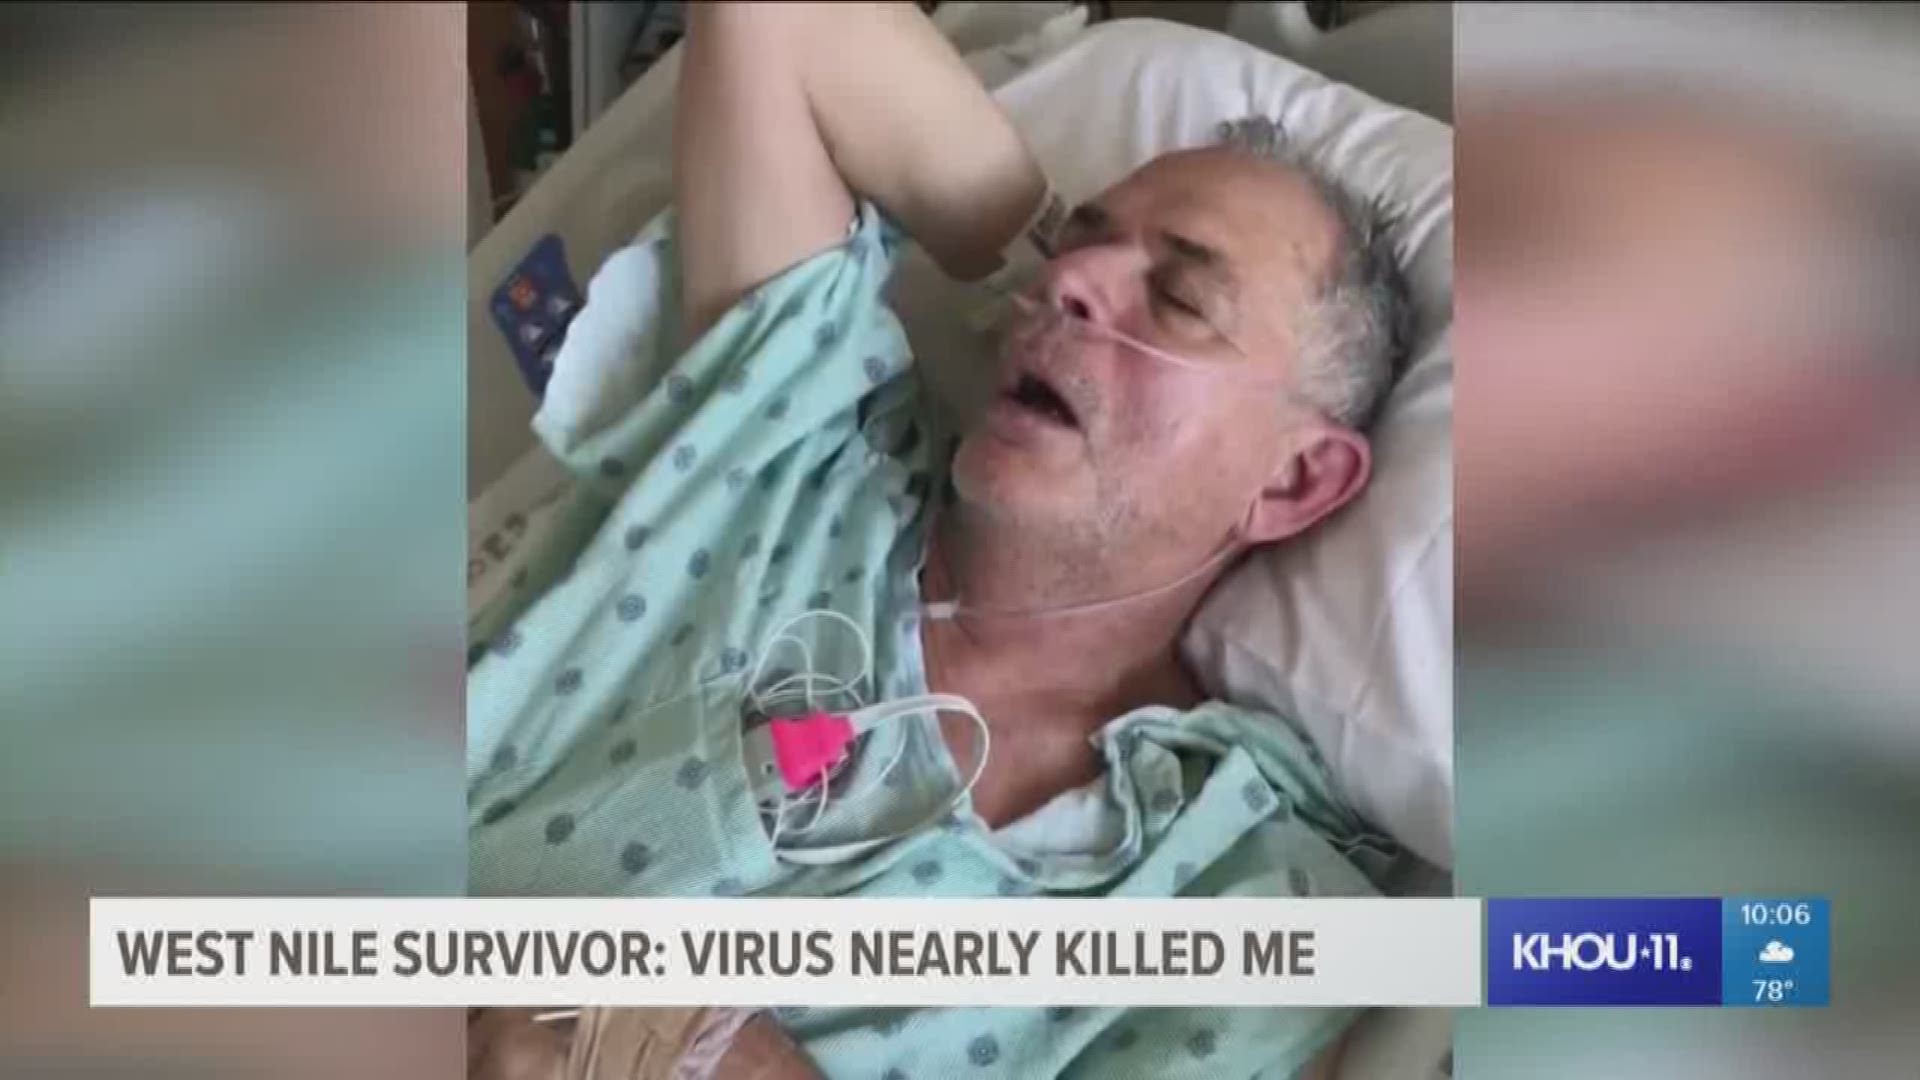 A West Nile Virus survivor who lost sight, motor skills and the ability to breathe hopes his story moves others to better protect themselves from mosquito bites.